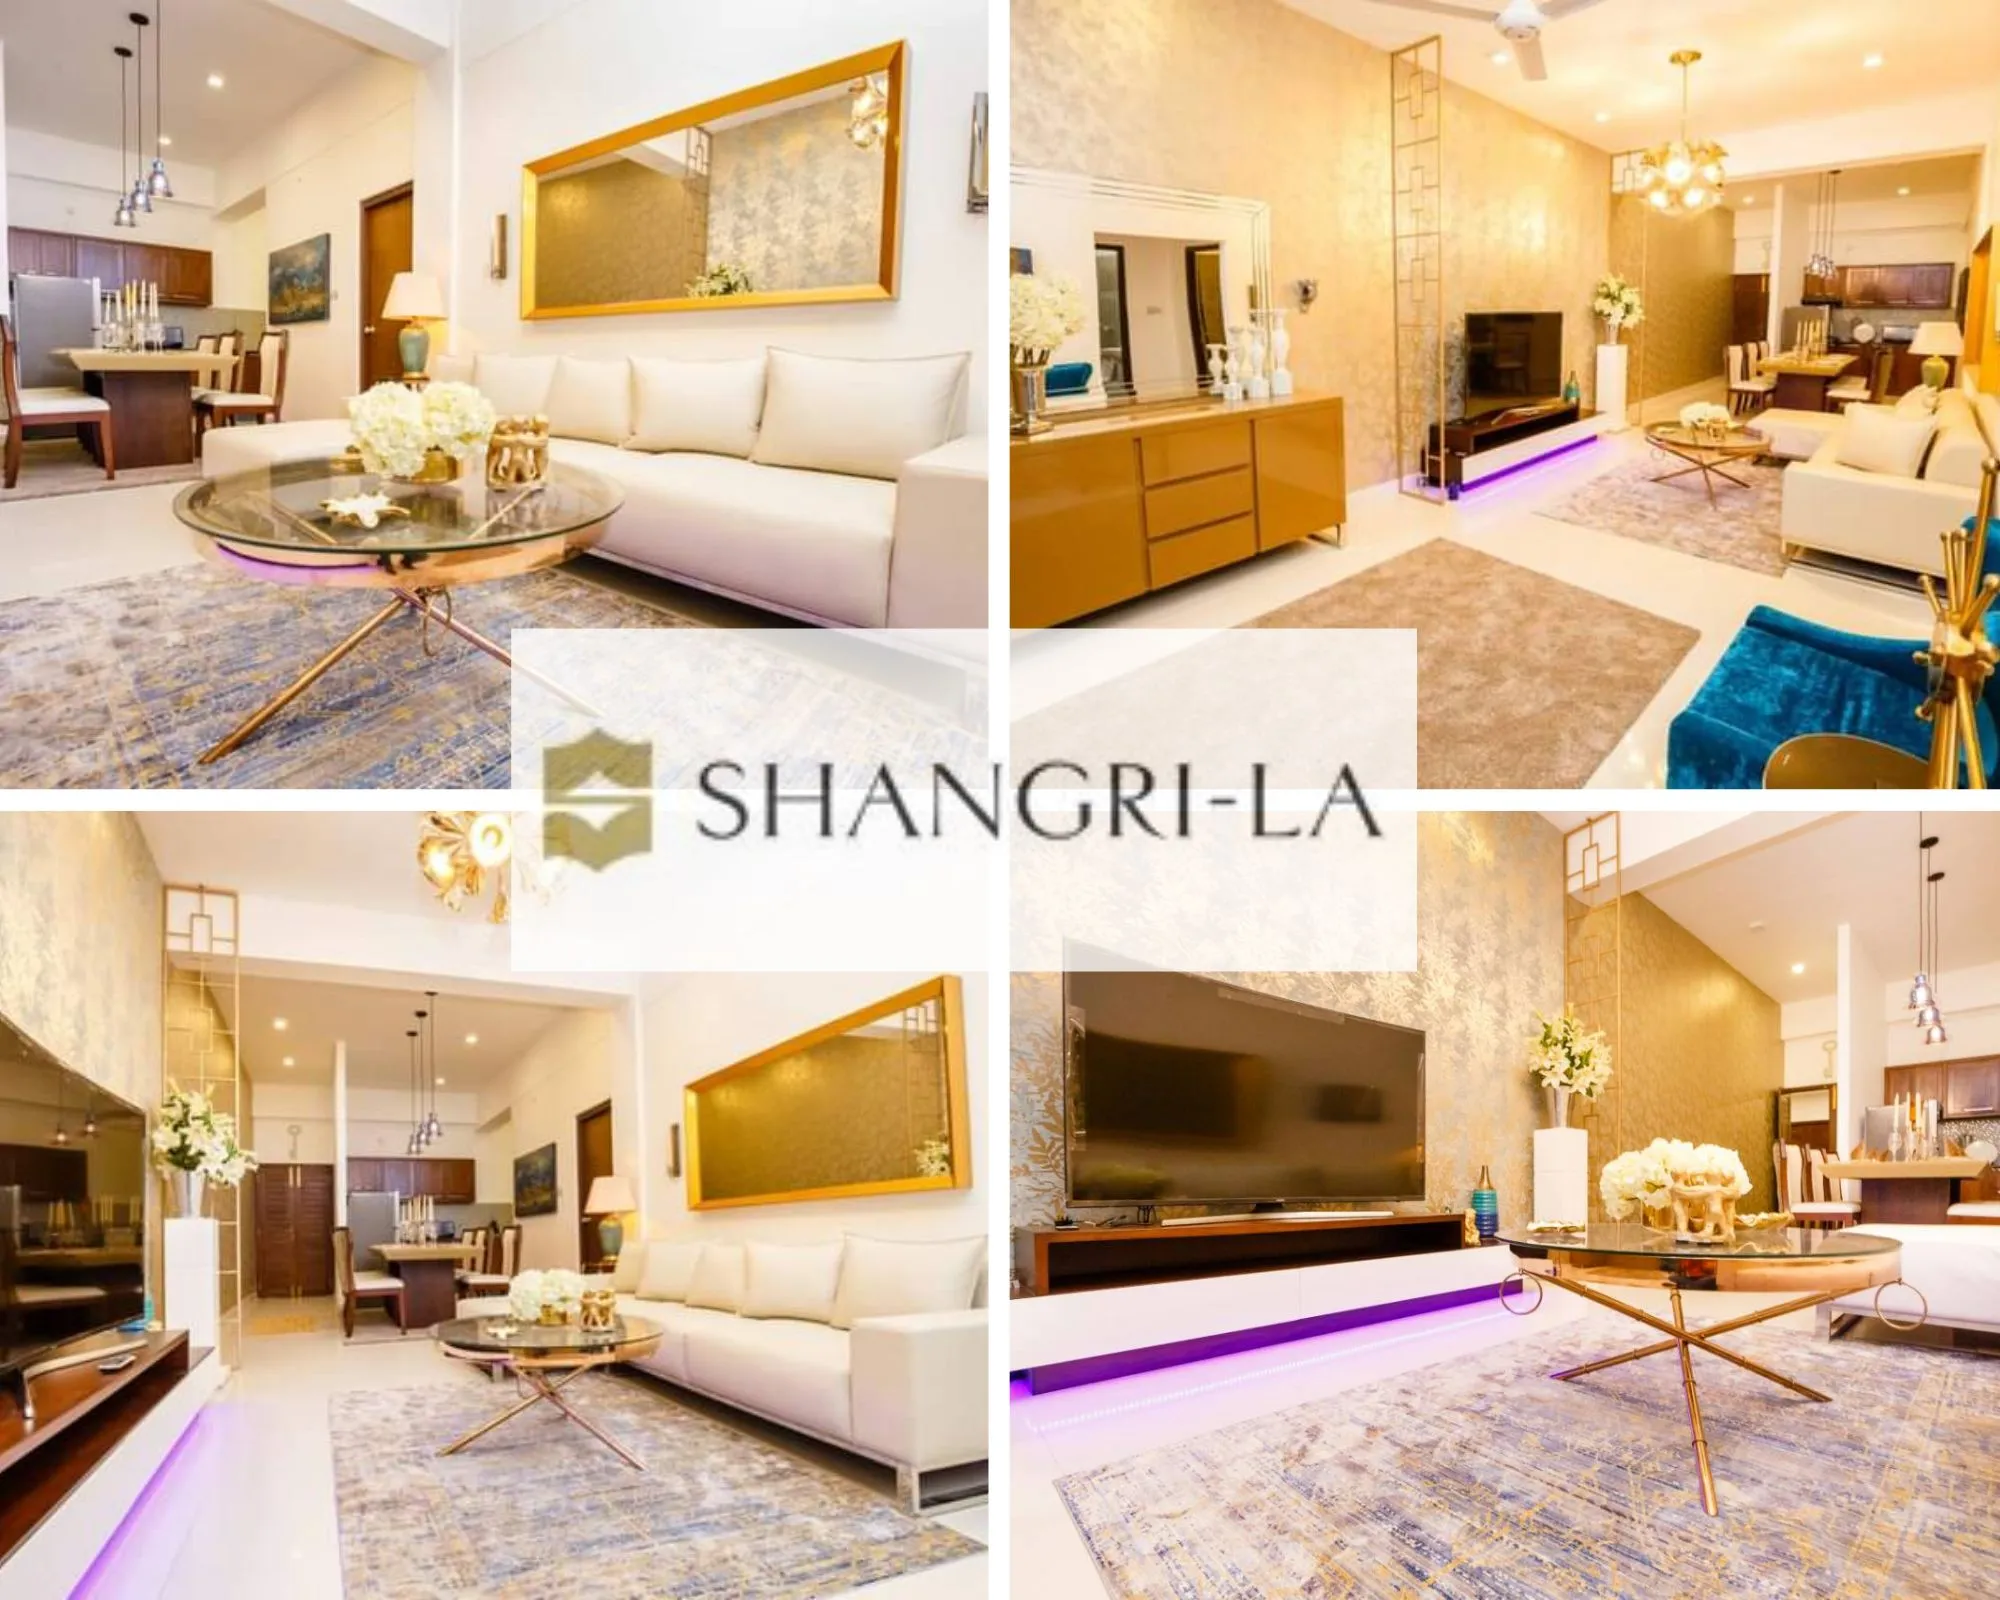 ShangriLa and one galleface interior wallpaper application project